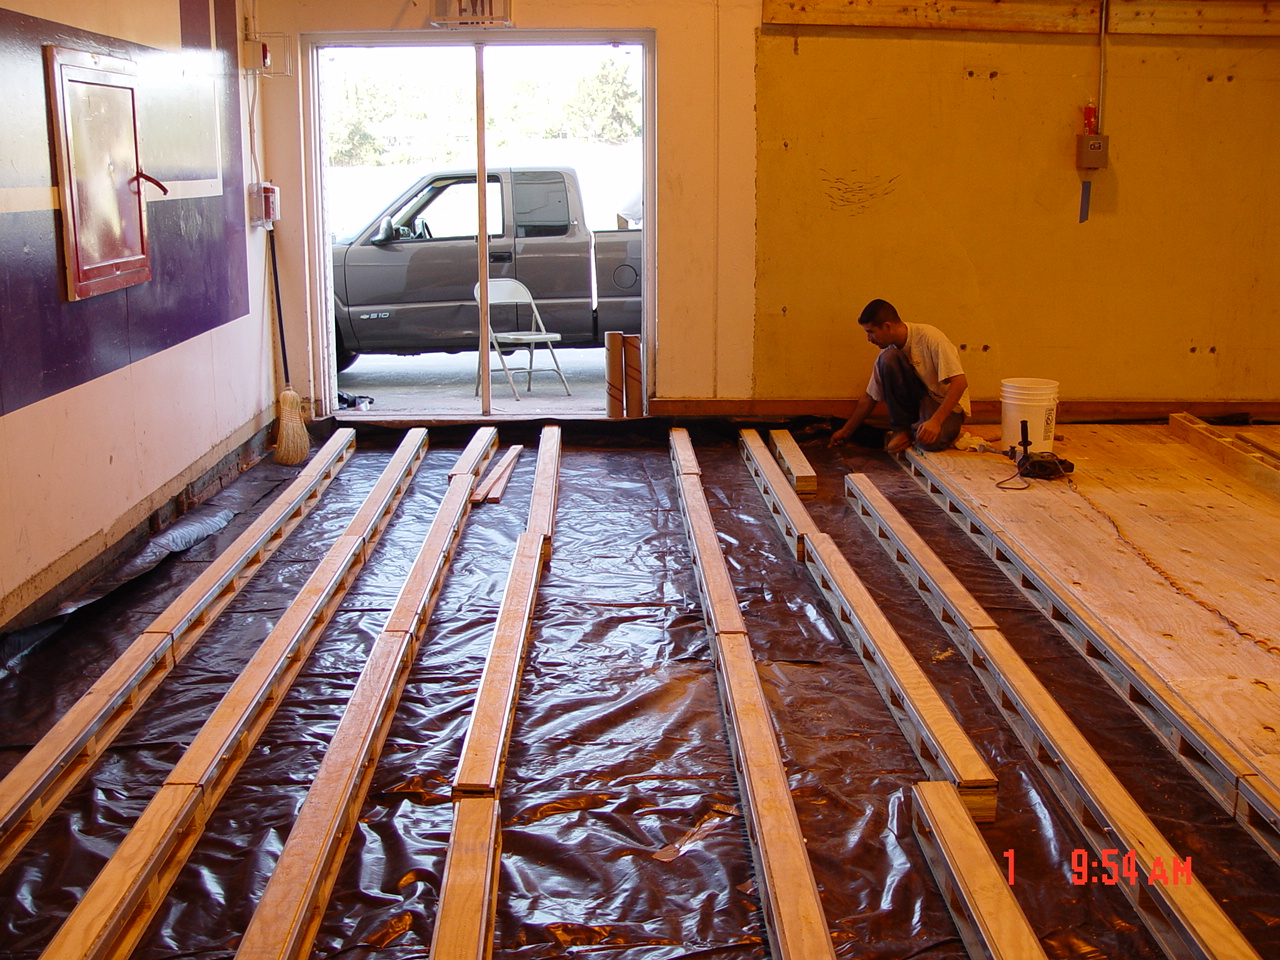 Sleepers over a moisture mitigation sheet membrane to support a hardwood sports floor